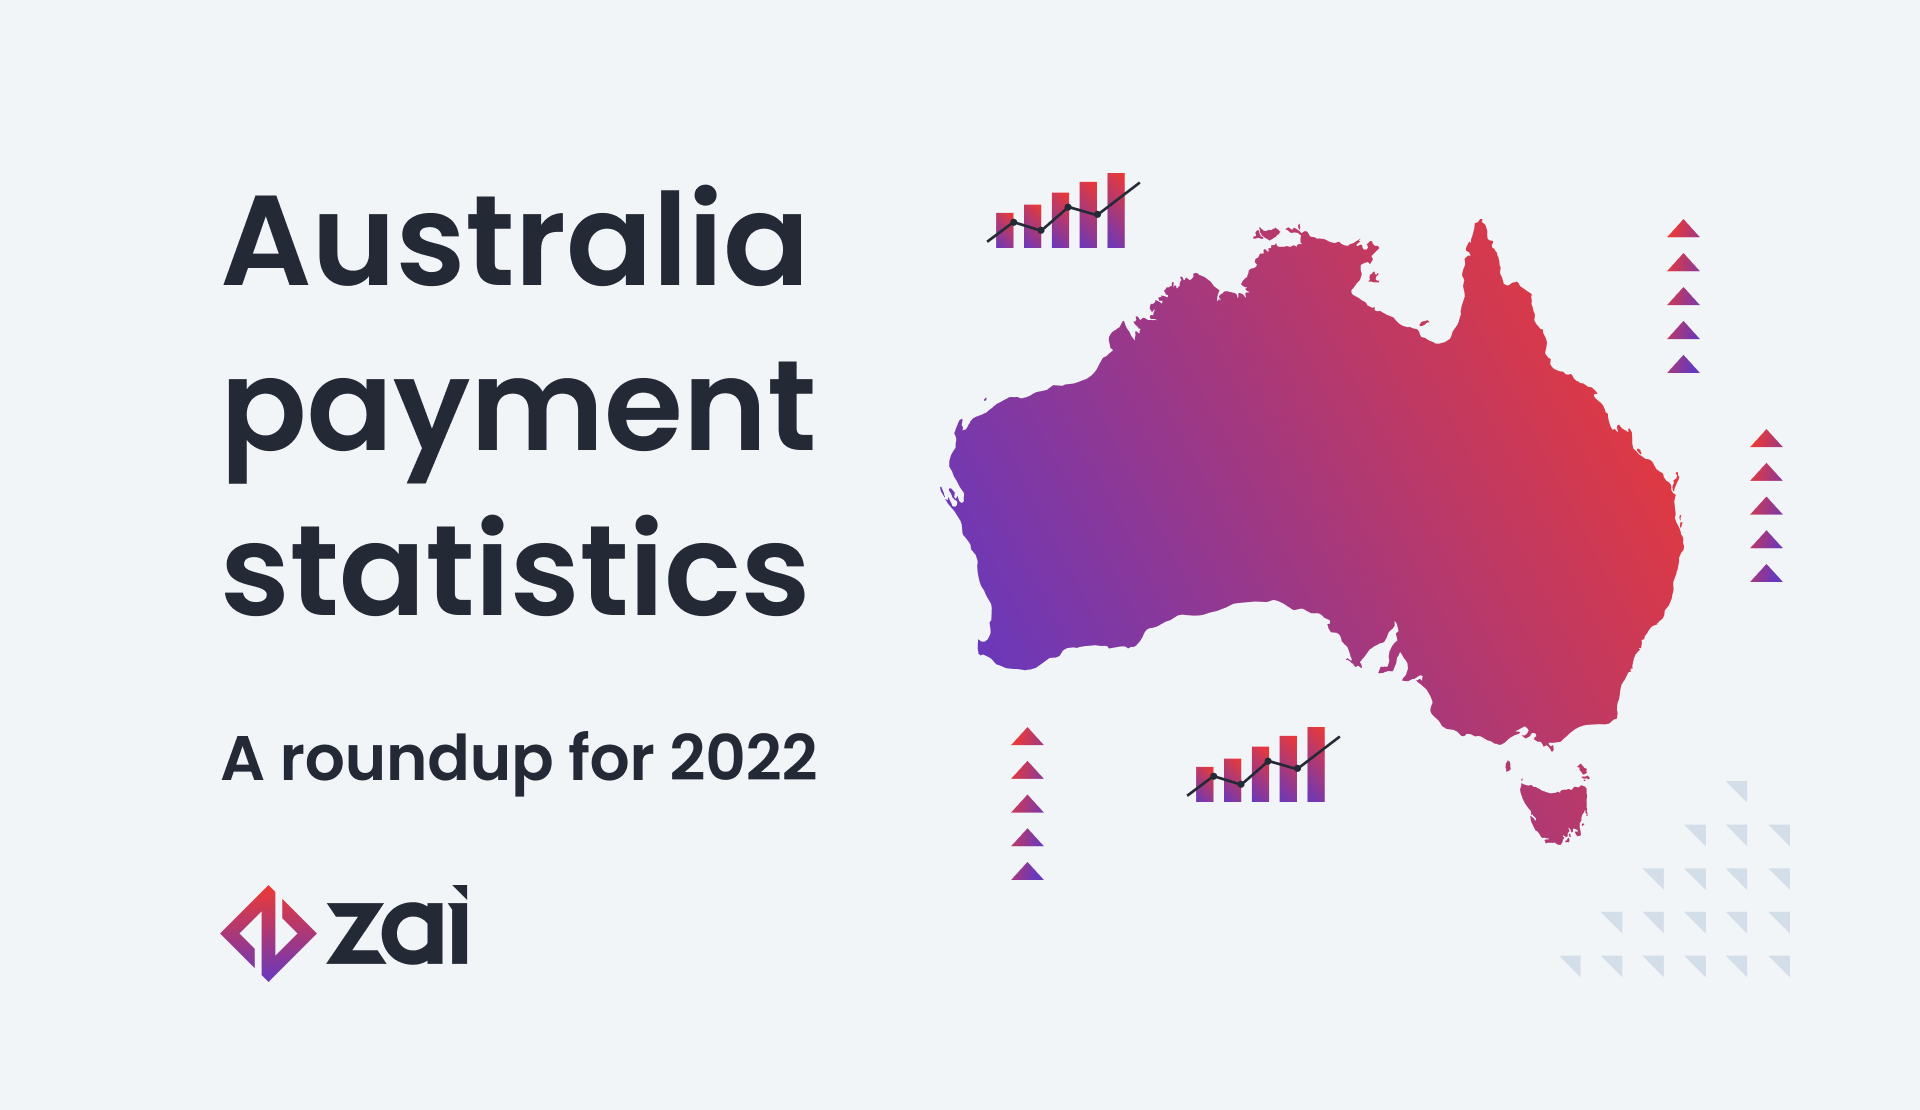 Australia payment statistics: A roundup for 2022